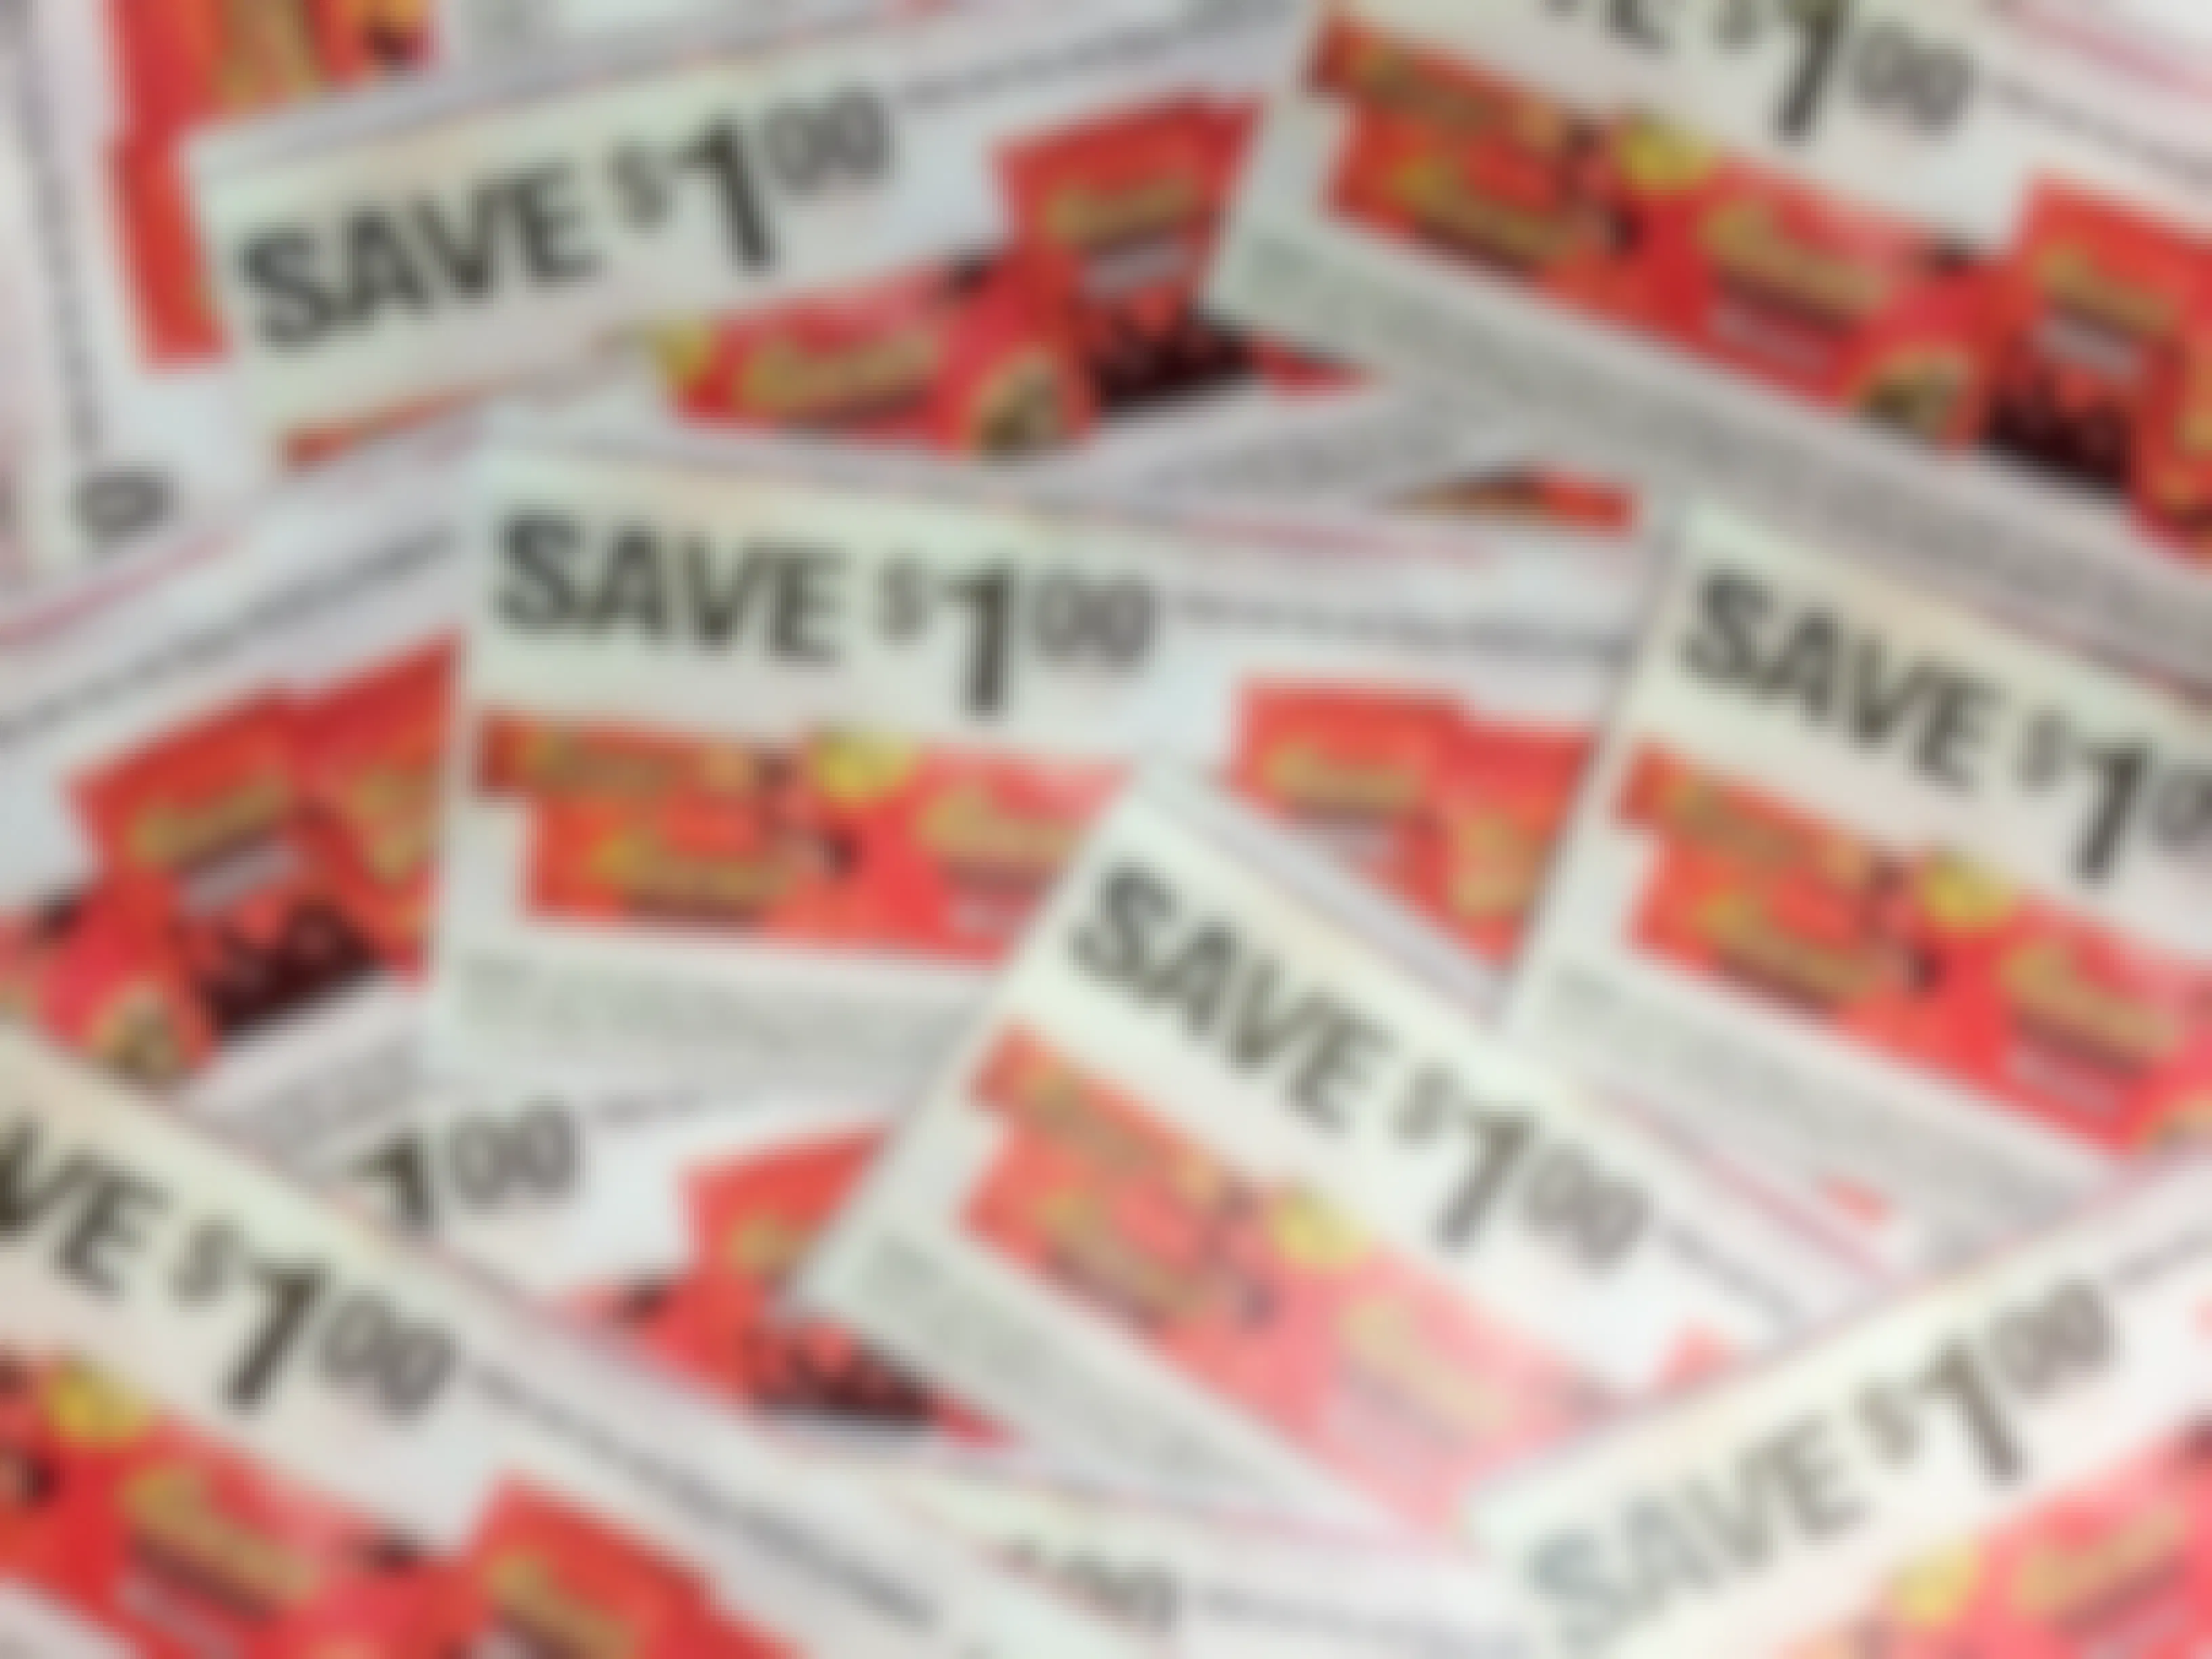 A pile of candy coupons that say, "Save $1 on any three Reese's products